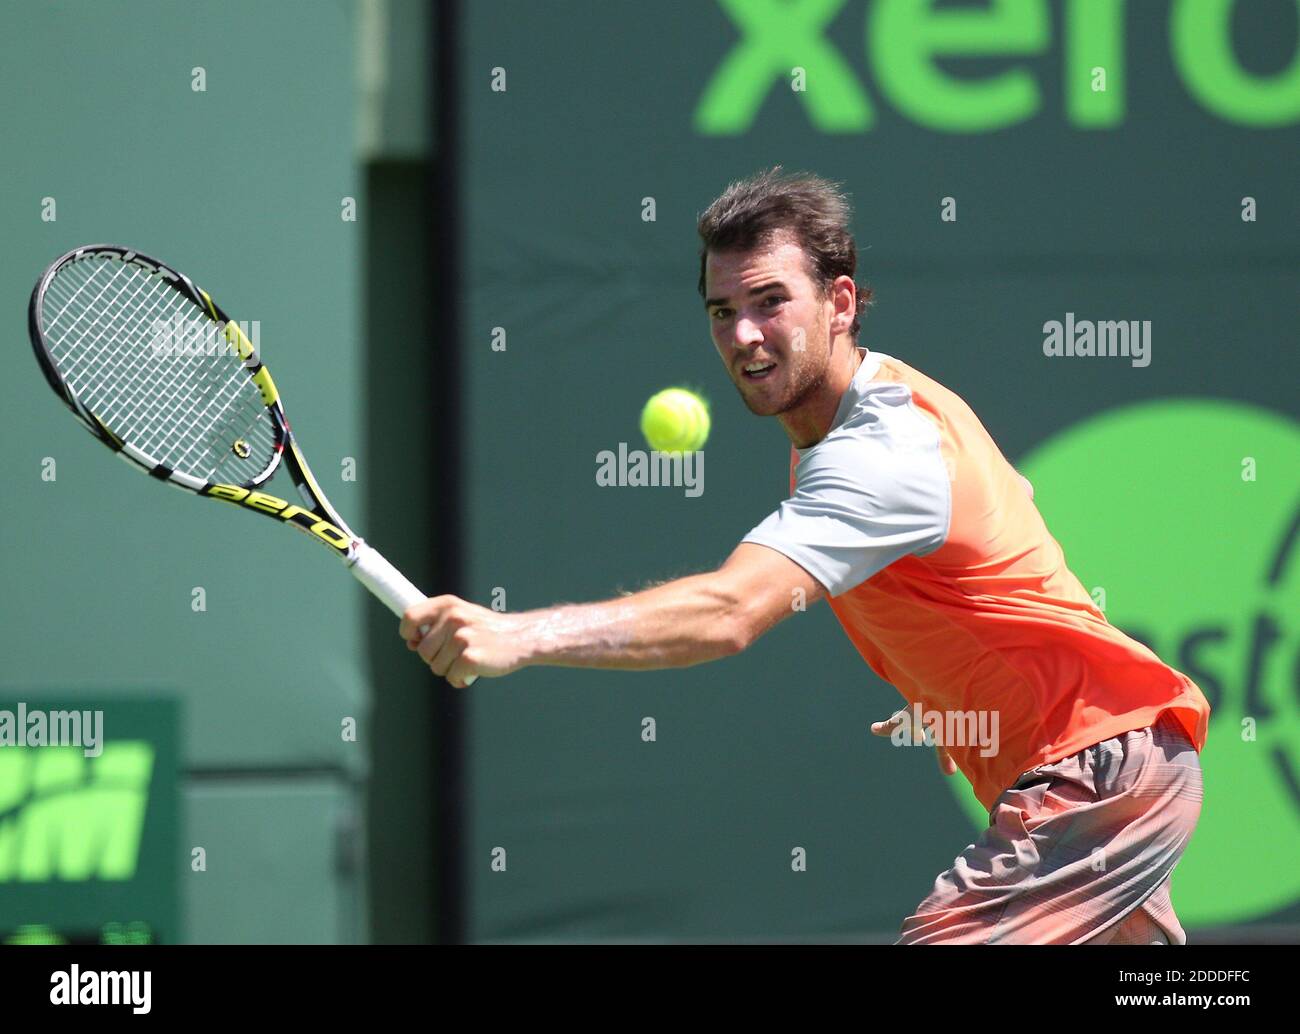 NO FILM, NO VIDEO, NO TV, NO DOCUMENTARY - Adrian Mannarino of France  returns a ball to Nikolay Davydenko of Russia during a first-round match at  the Sony Open tennis tournament at